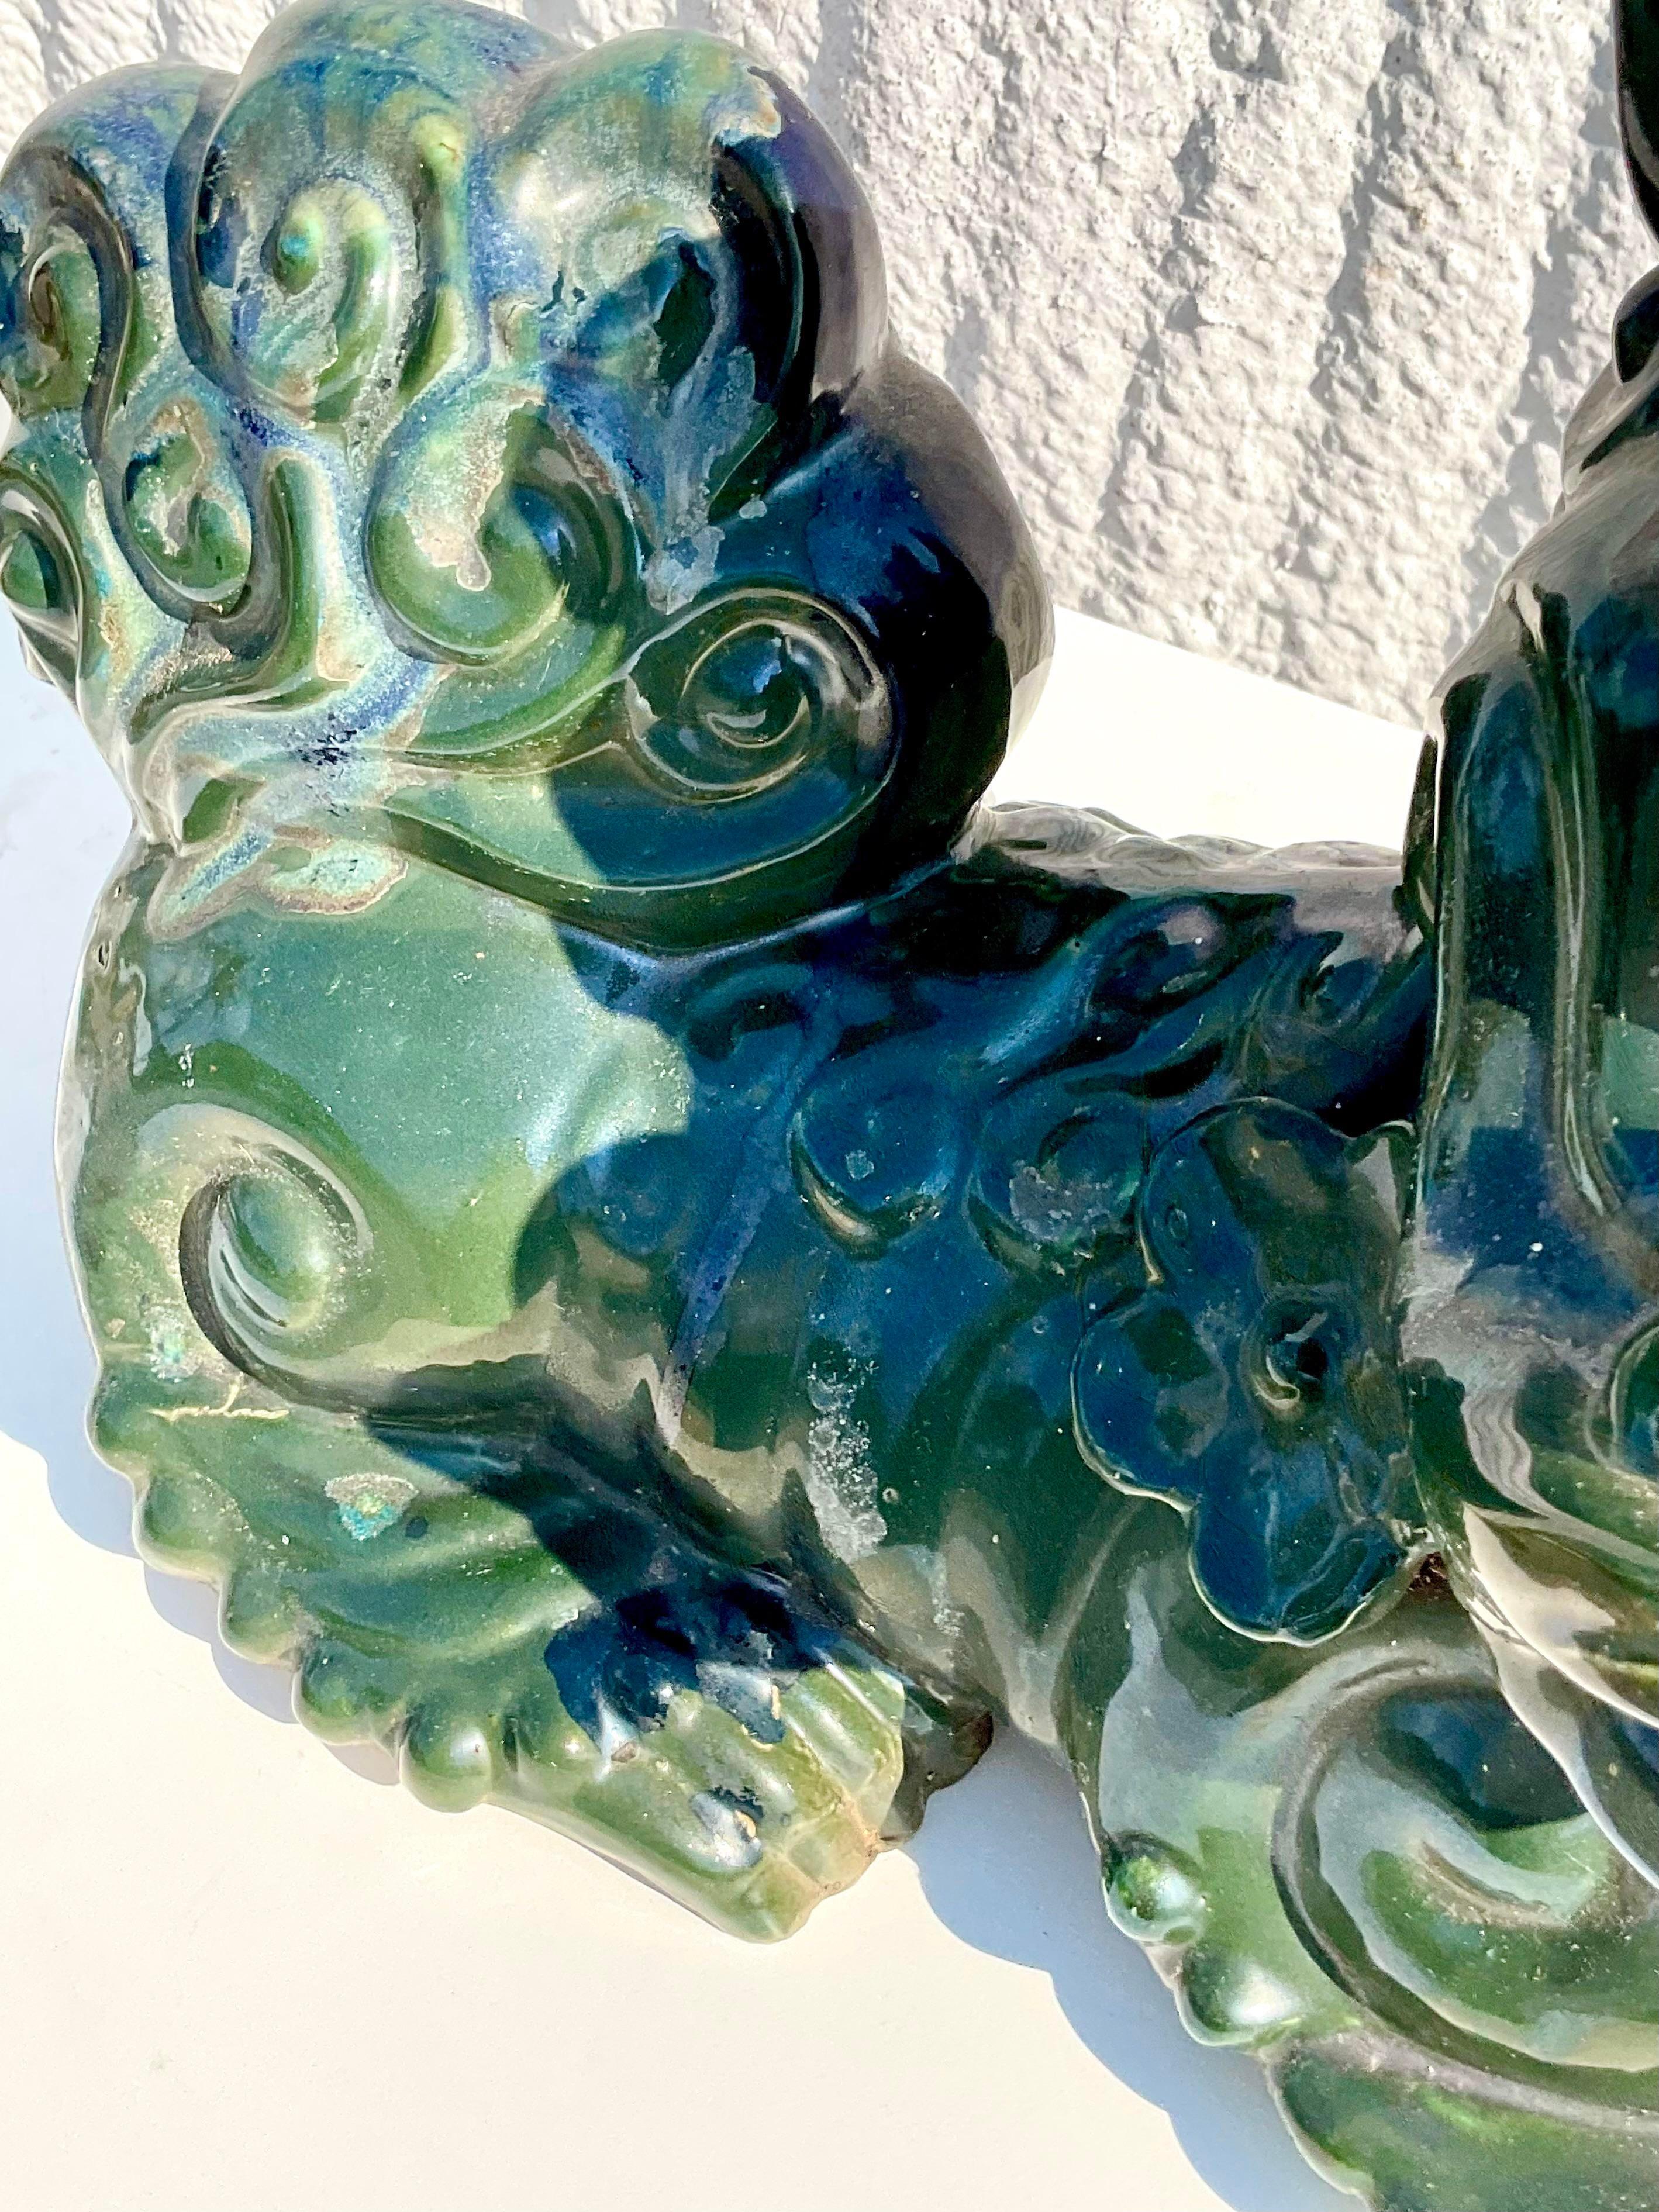 20th Century Vintage Asian Glazed Ceramic Foo Dogs - a Pair For Sale